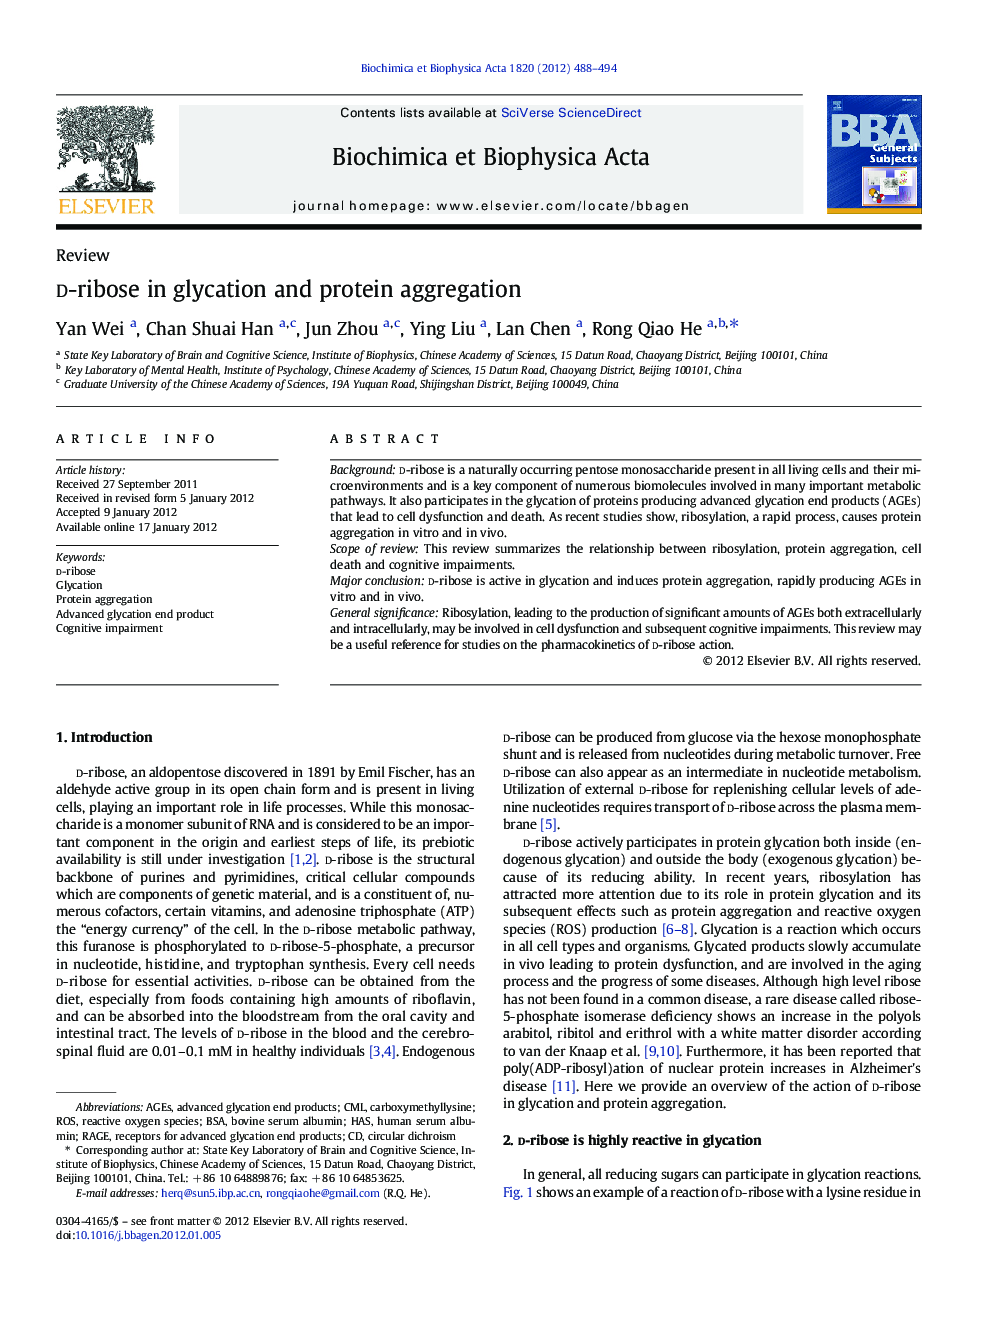 d-ribose in glycation and protein aggregation